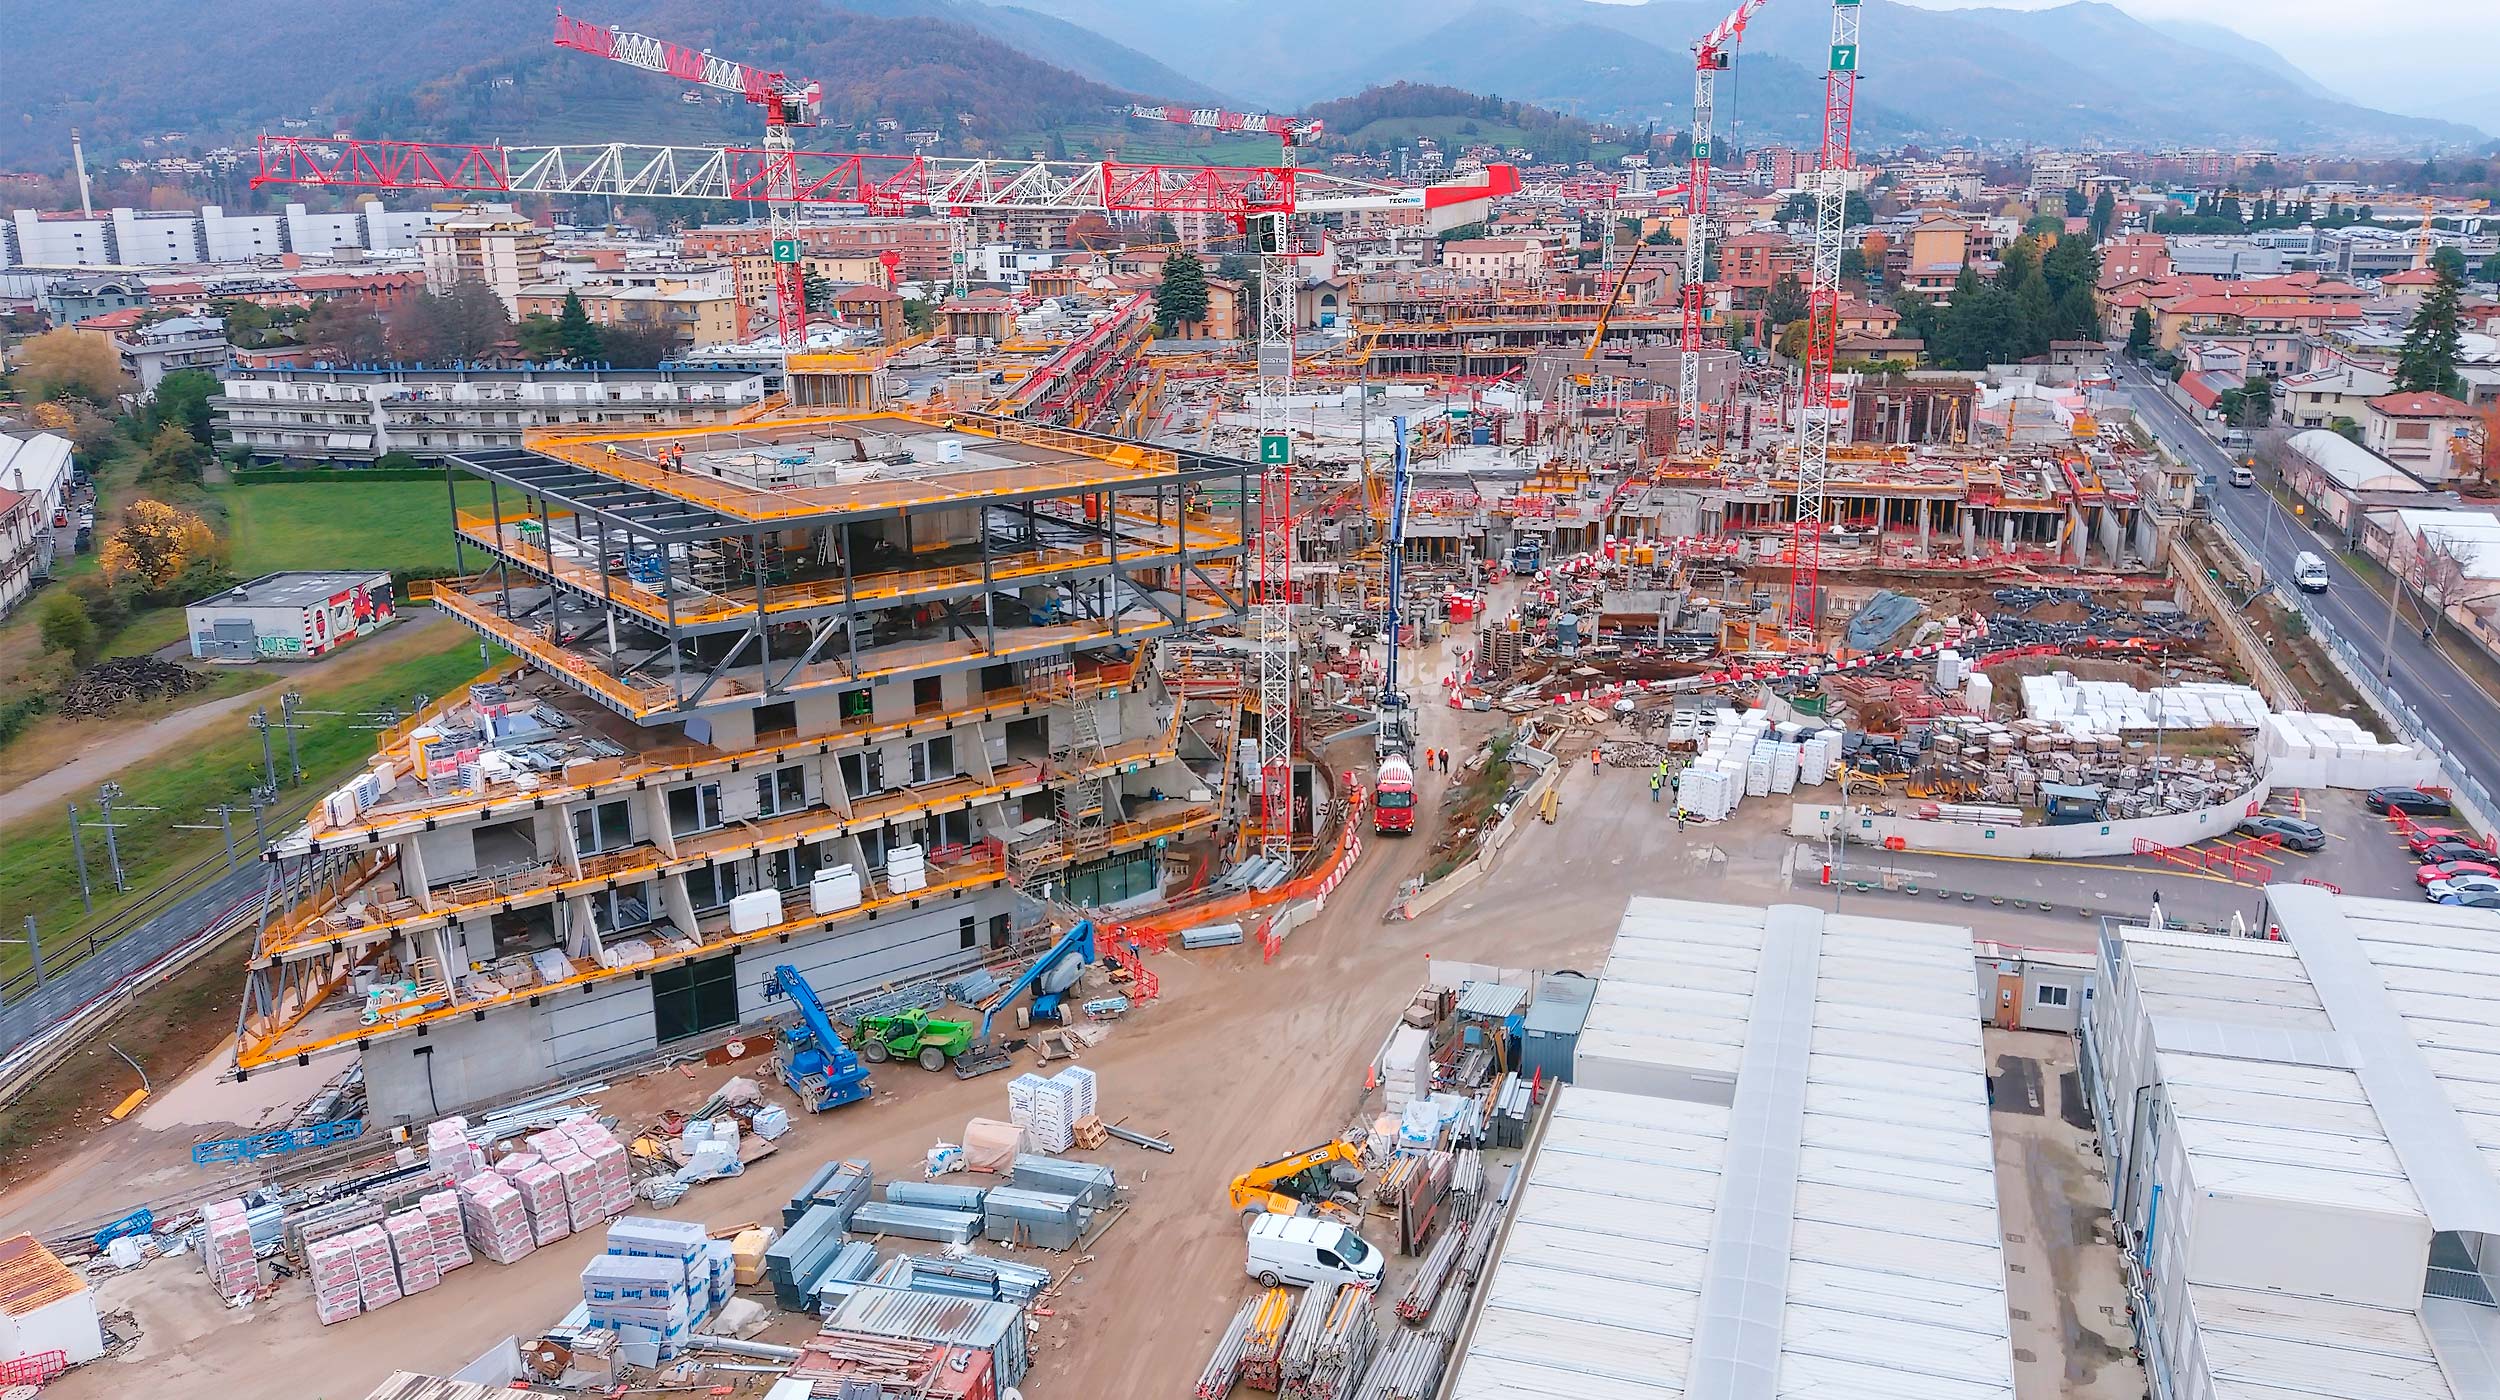 The first Smart City project has been launched in Bergamo, regenerating 150,000 m² of one area in the city. ULMA, in addition to offering shoring and formwork solutions, has guaranteed safety throughout the entire process.